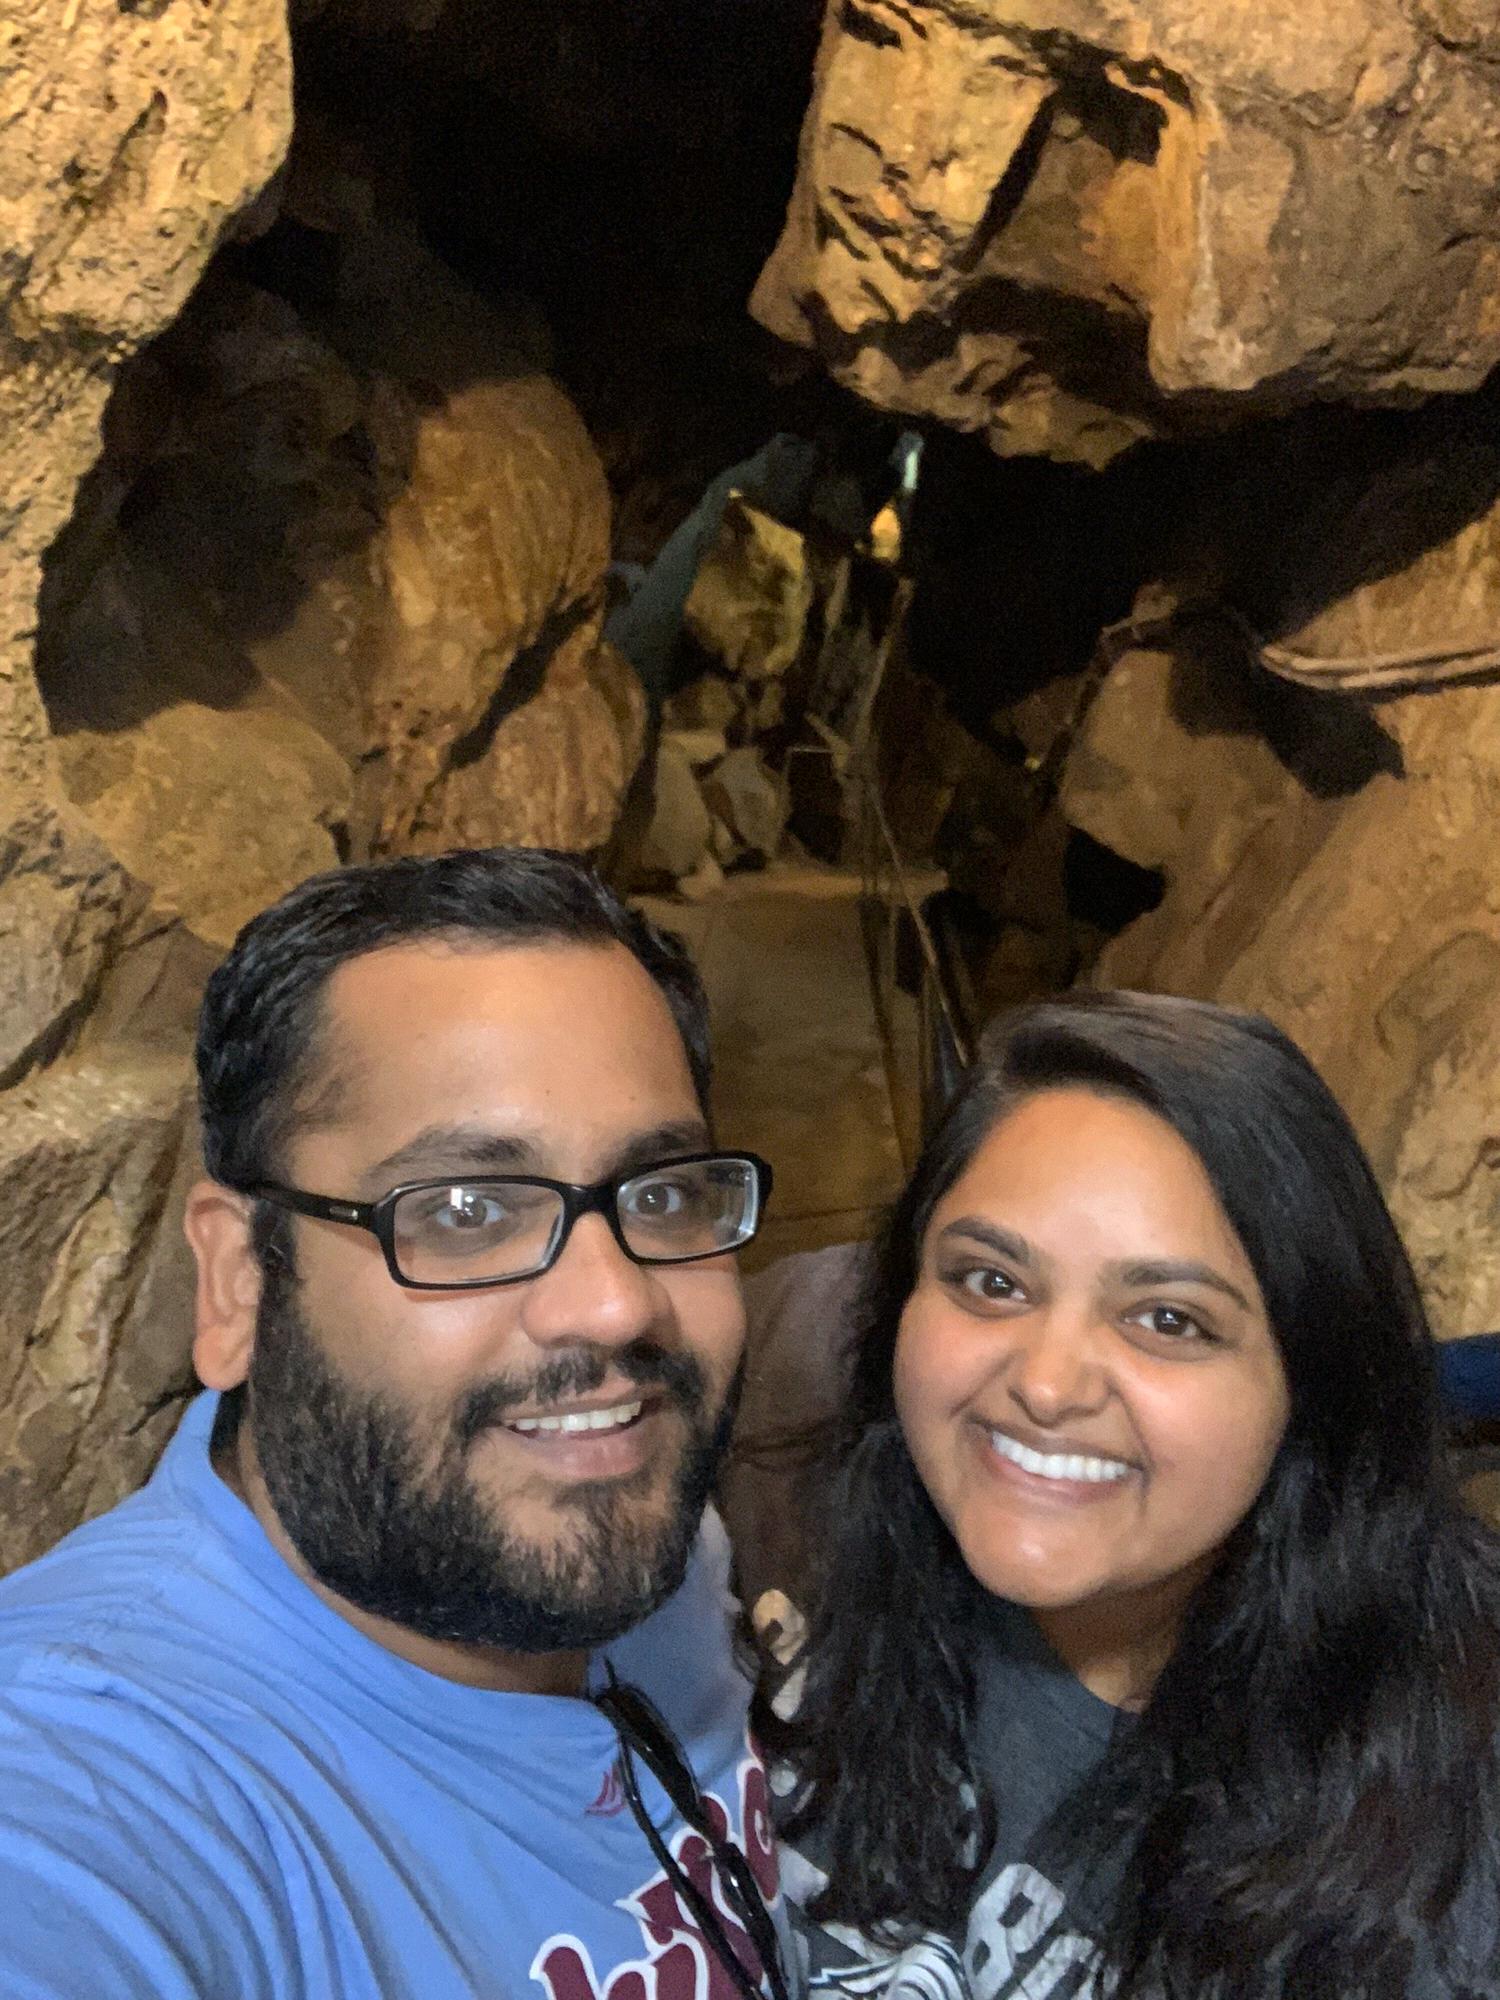 Lost River Caverns- Hellertown, PA August
2019